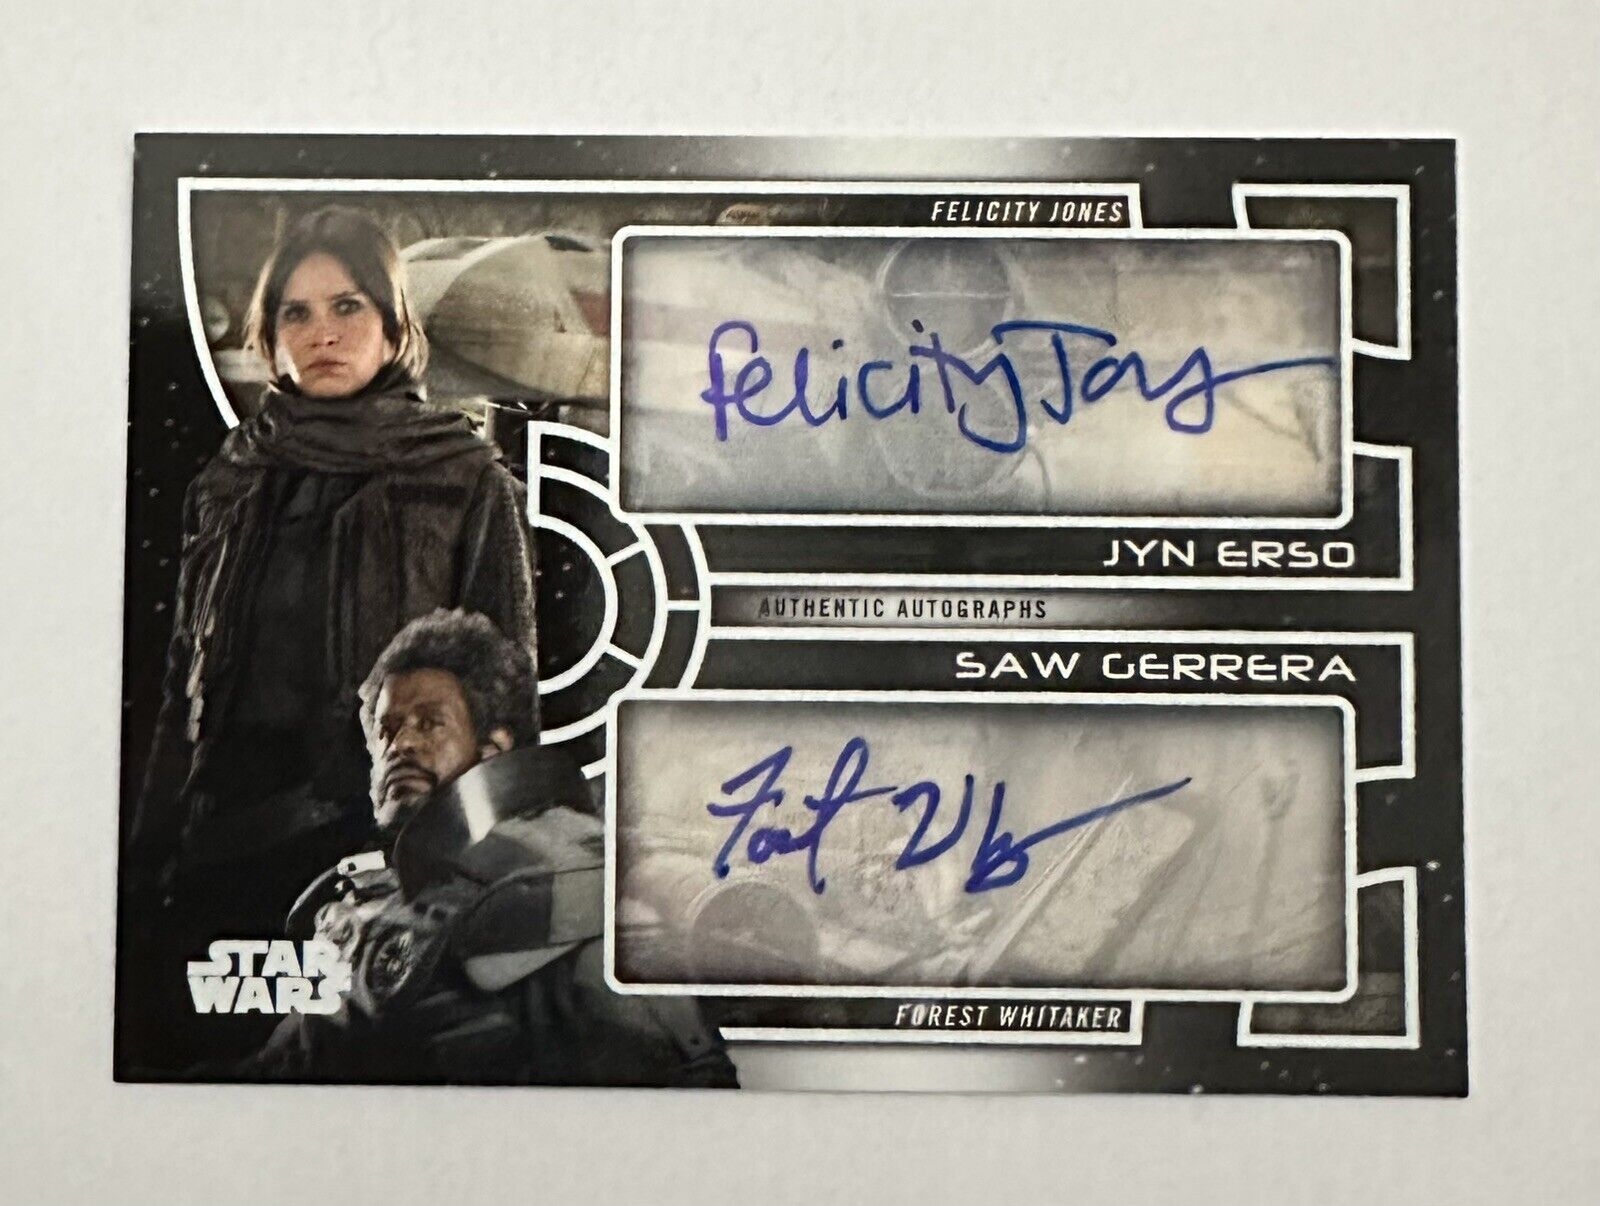 2018 topps star wars Felicity Jones Forest Whitaker dual autograph card 2/5